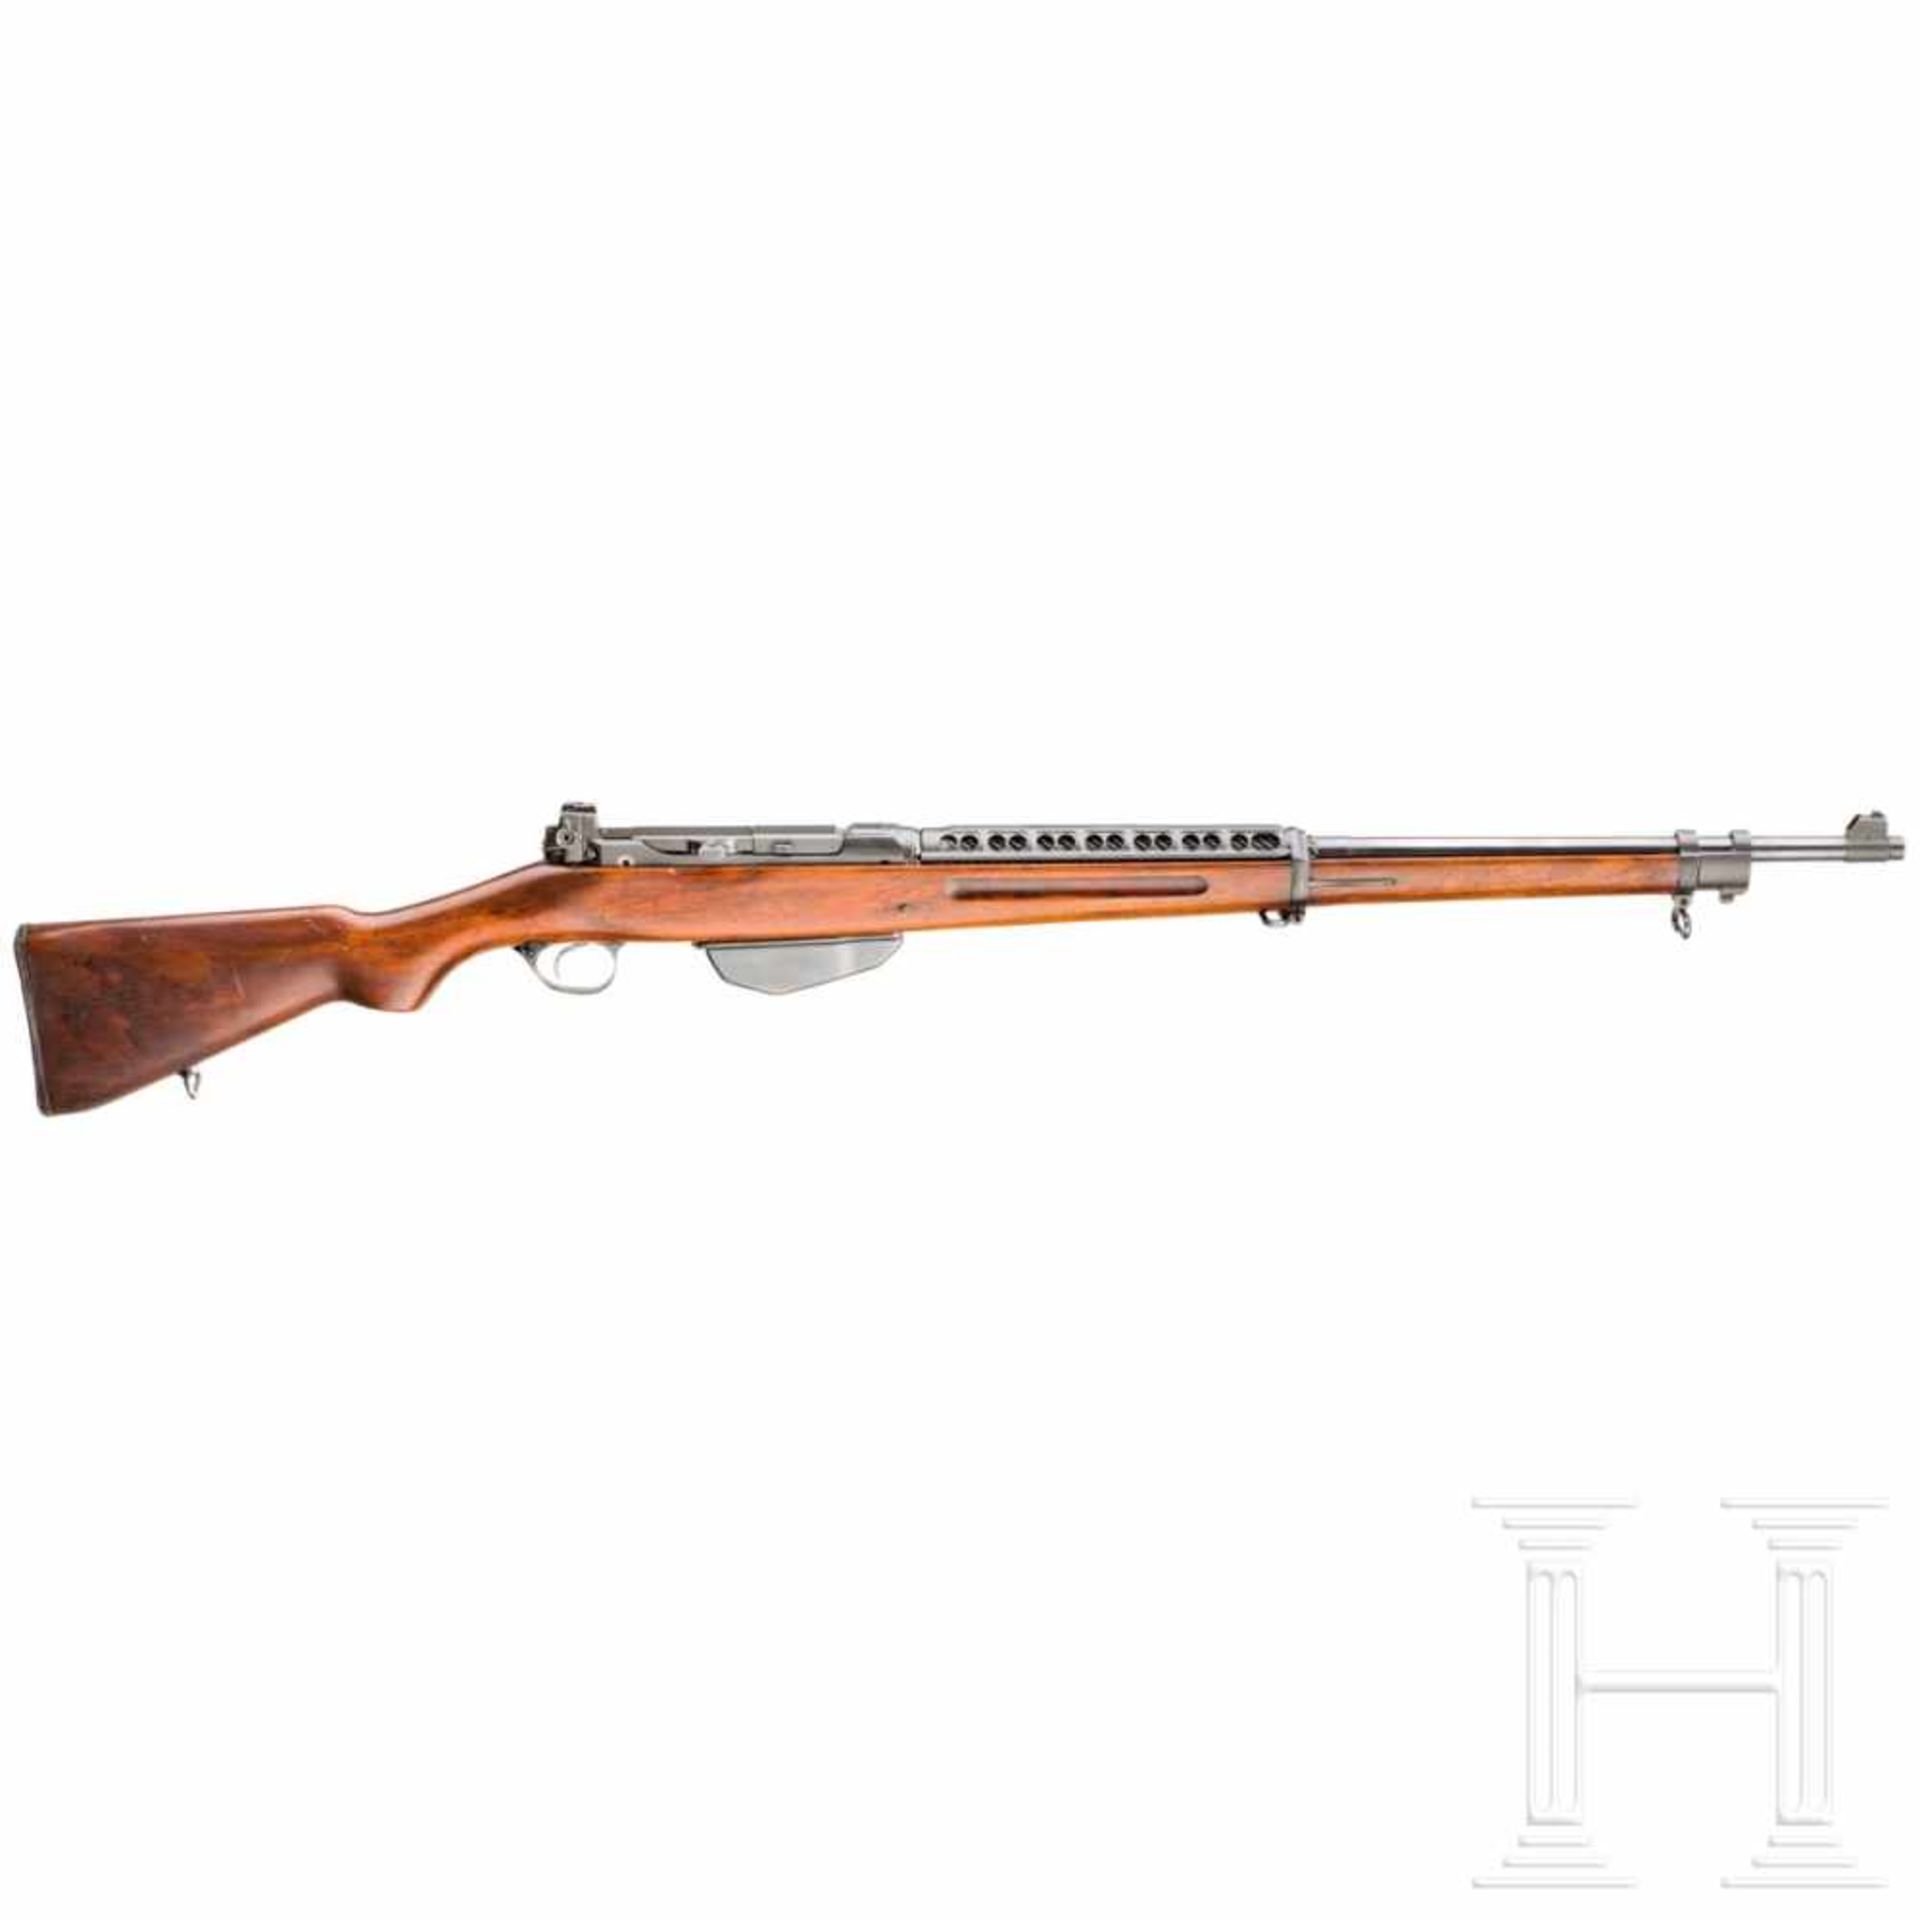 A Vickers Pedersen self-loading rifle Mod. PA, military test in the 1920s/1930sCal. .276 Pedersen (